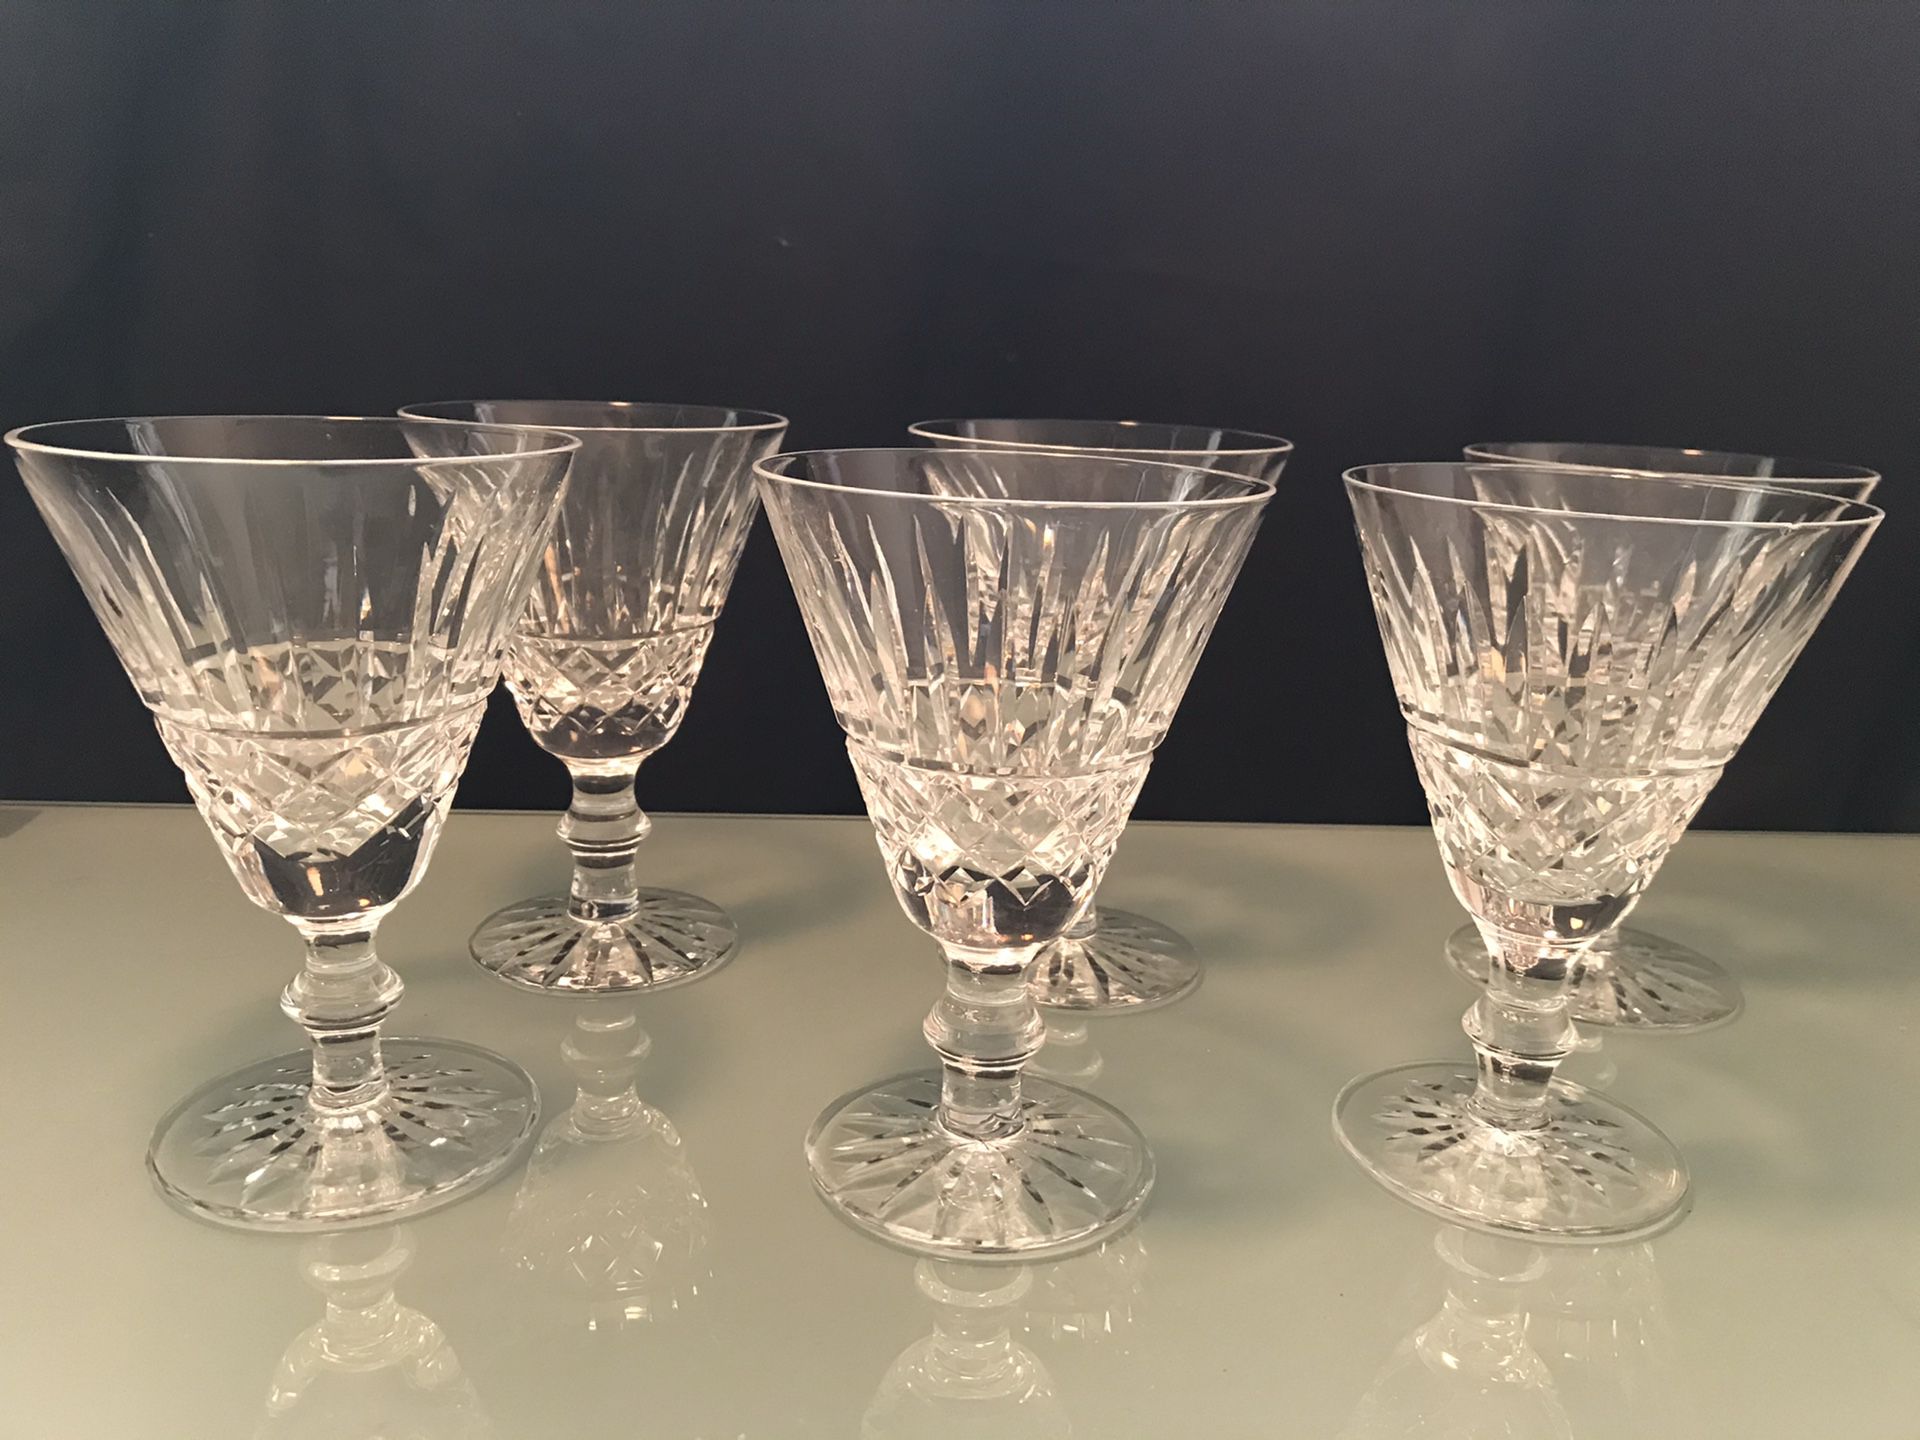 Waterford crystal wine glasses. Set of 6. One glass has tiny little chip. Other than that the glasses are in good condition.